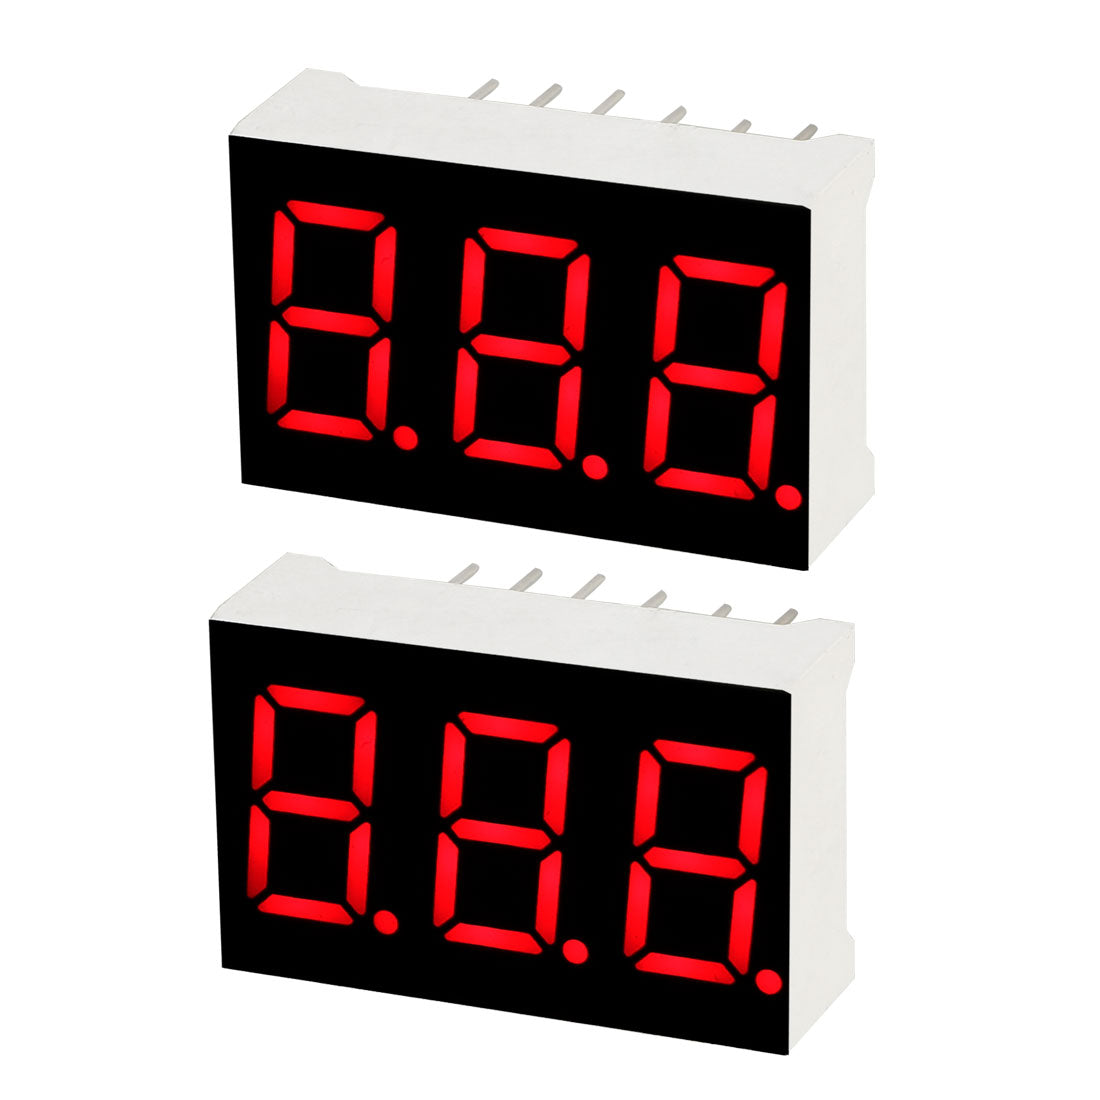 uxcell Uxcell Common Anode 11 Pin 3 Bit 7 Segment 0.89 x 0.55 x 0.28 Inch 0.35" Red LED Display Digital Tube 2pcs